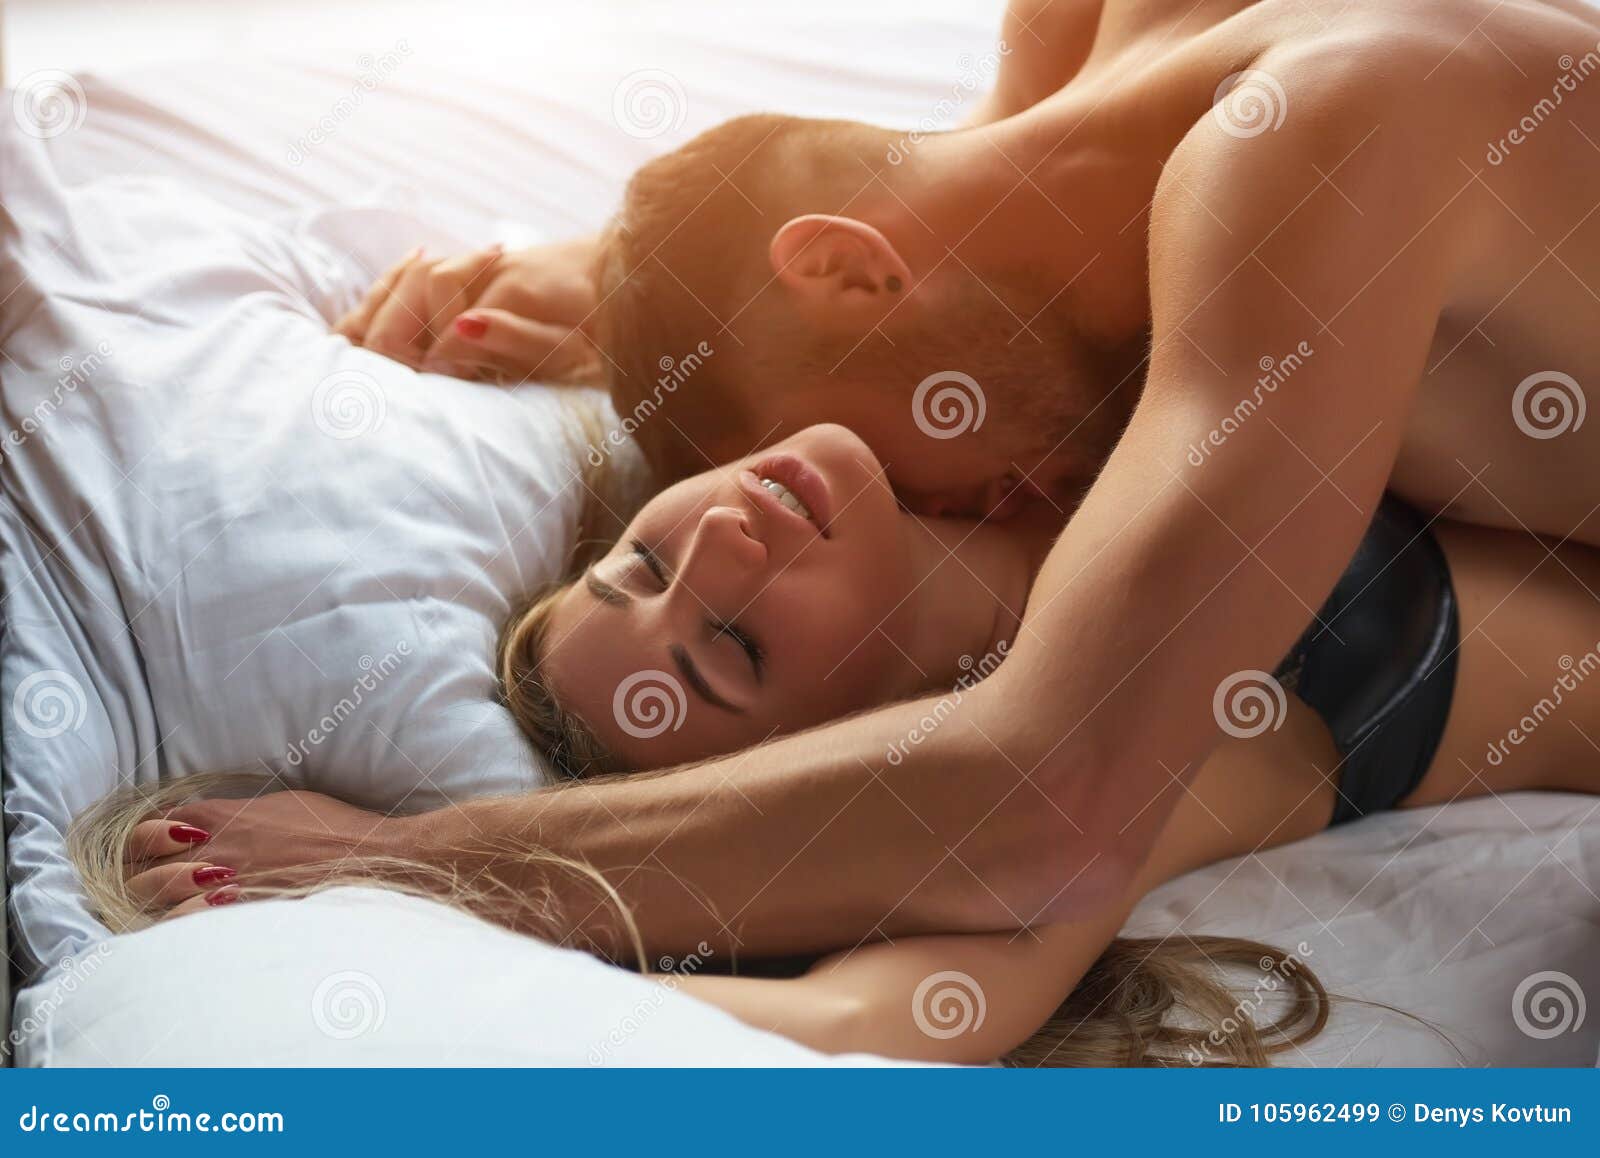 Couple having sex. stock image. Image of lovers, irresistible ...